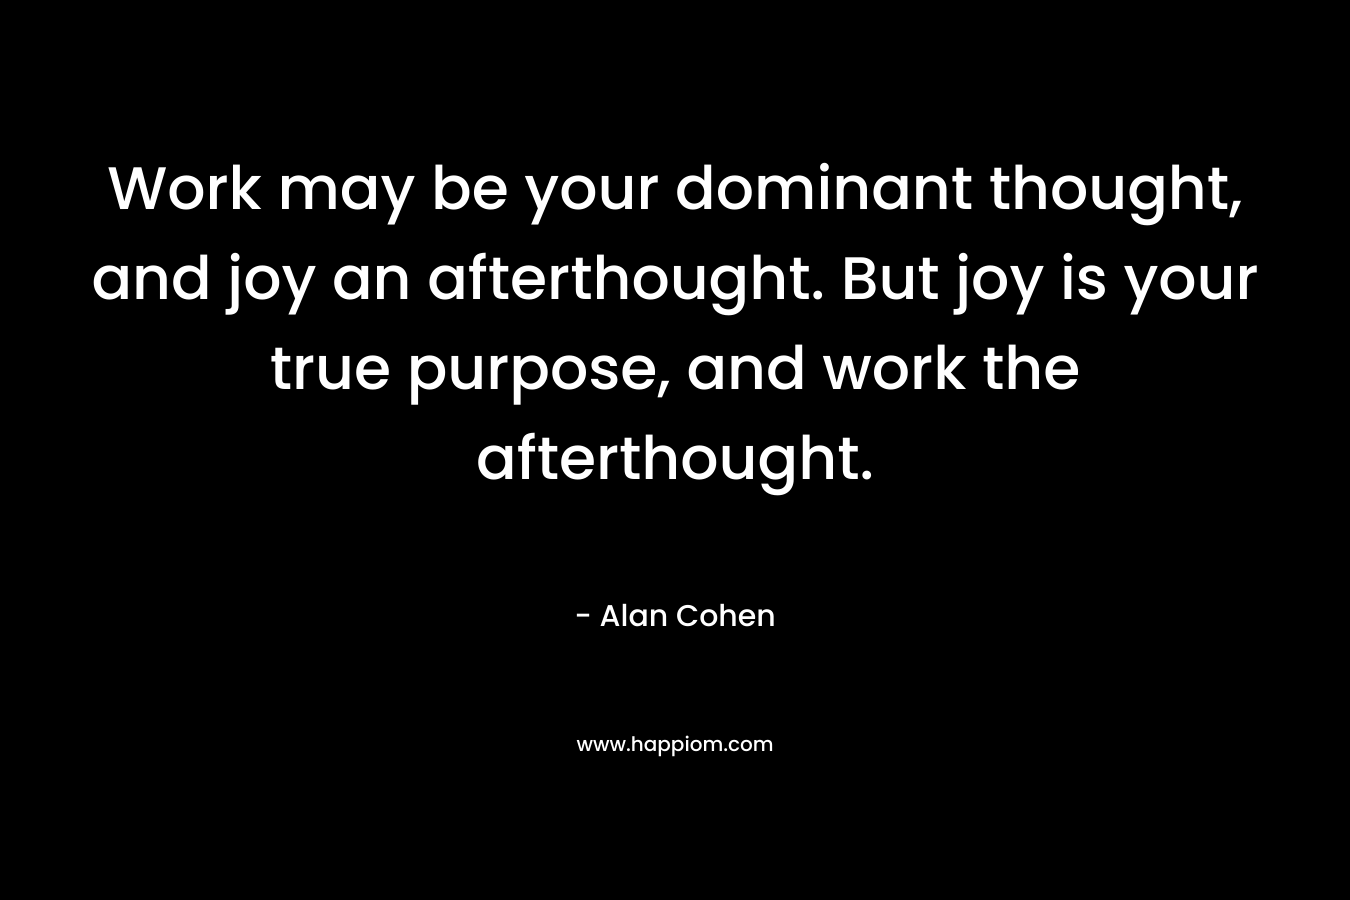 Work may be your dominant thought, and joy an afterthought. But joy is your true purpose, and work the afterthought. – Alan Cohen